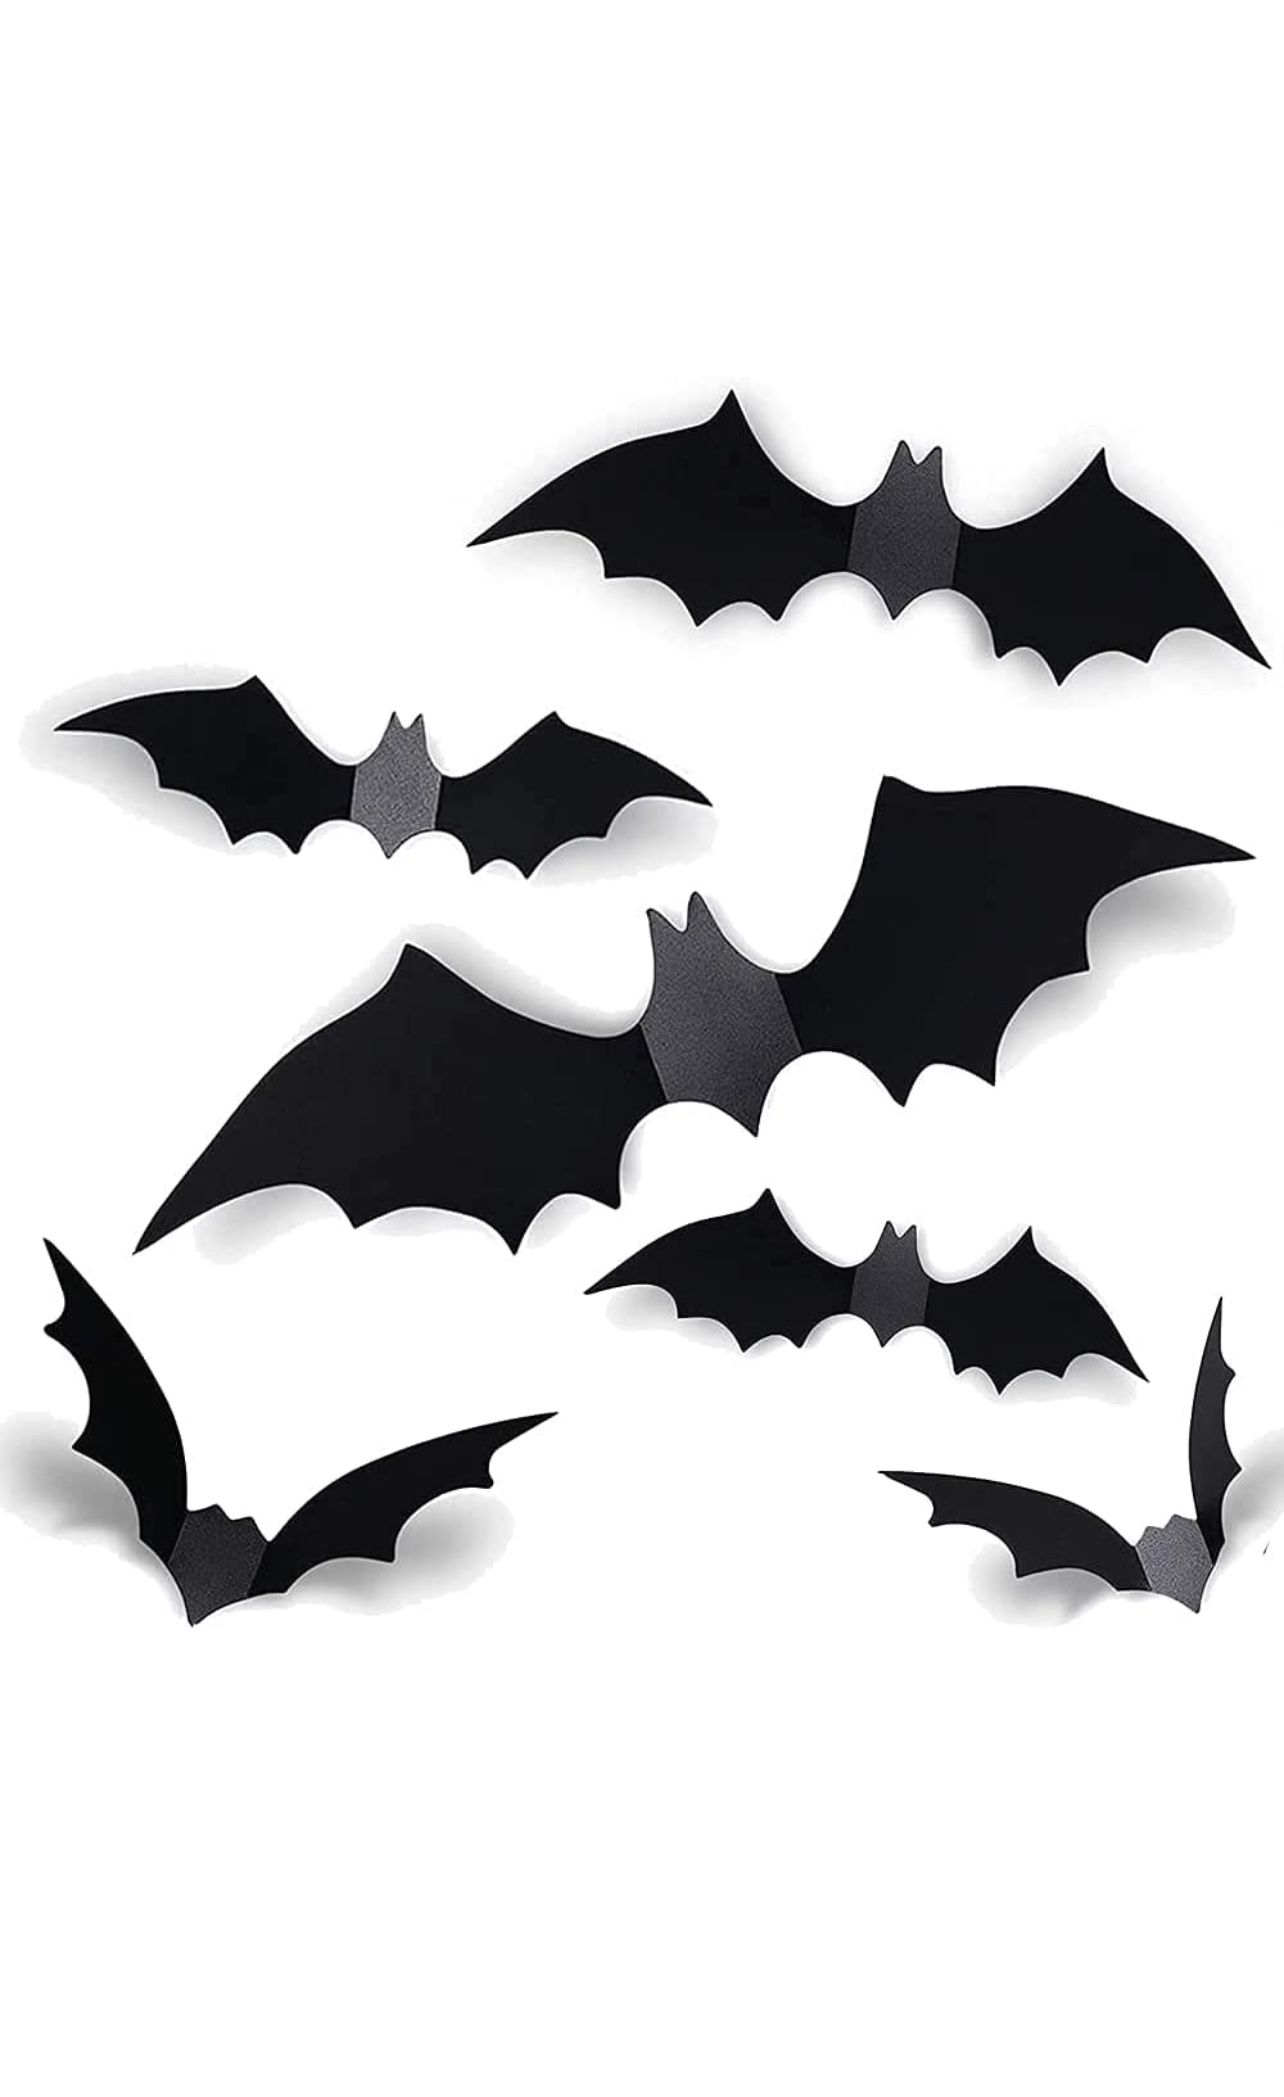 Halloween Window Decorations, 60 PCS PVC 3D 4 Sizes Realistic Scary Bats Window Decal Wall Stickers for Home Bathroom Indoor Hallowmas Decoration Part